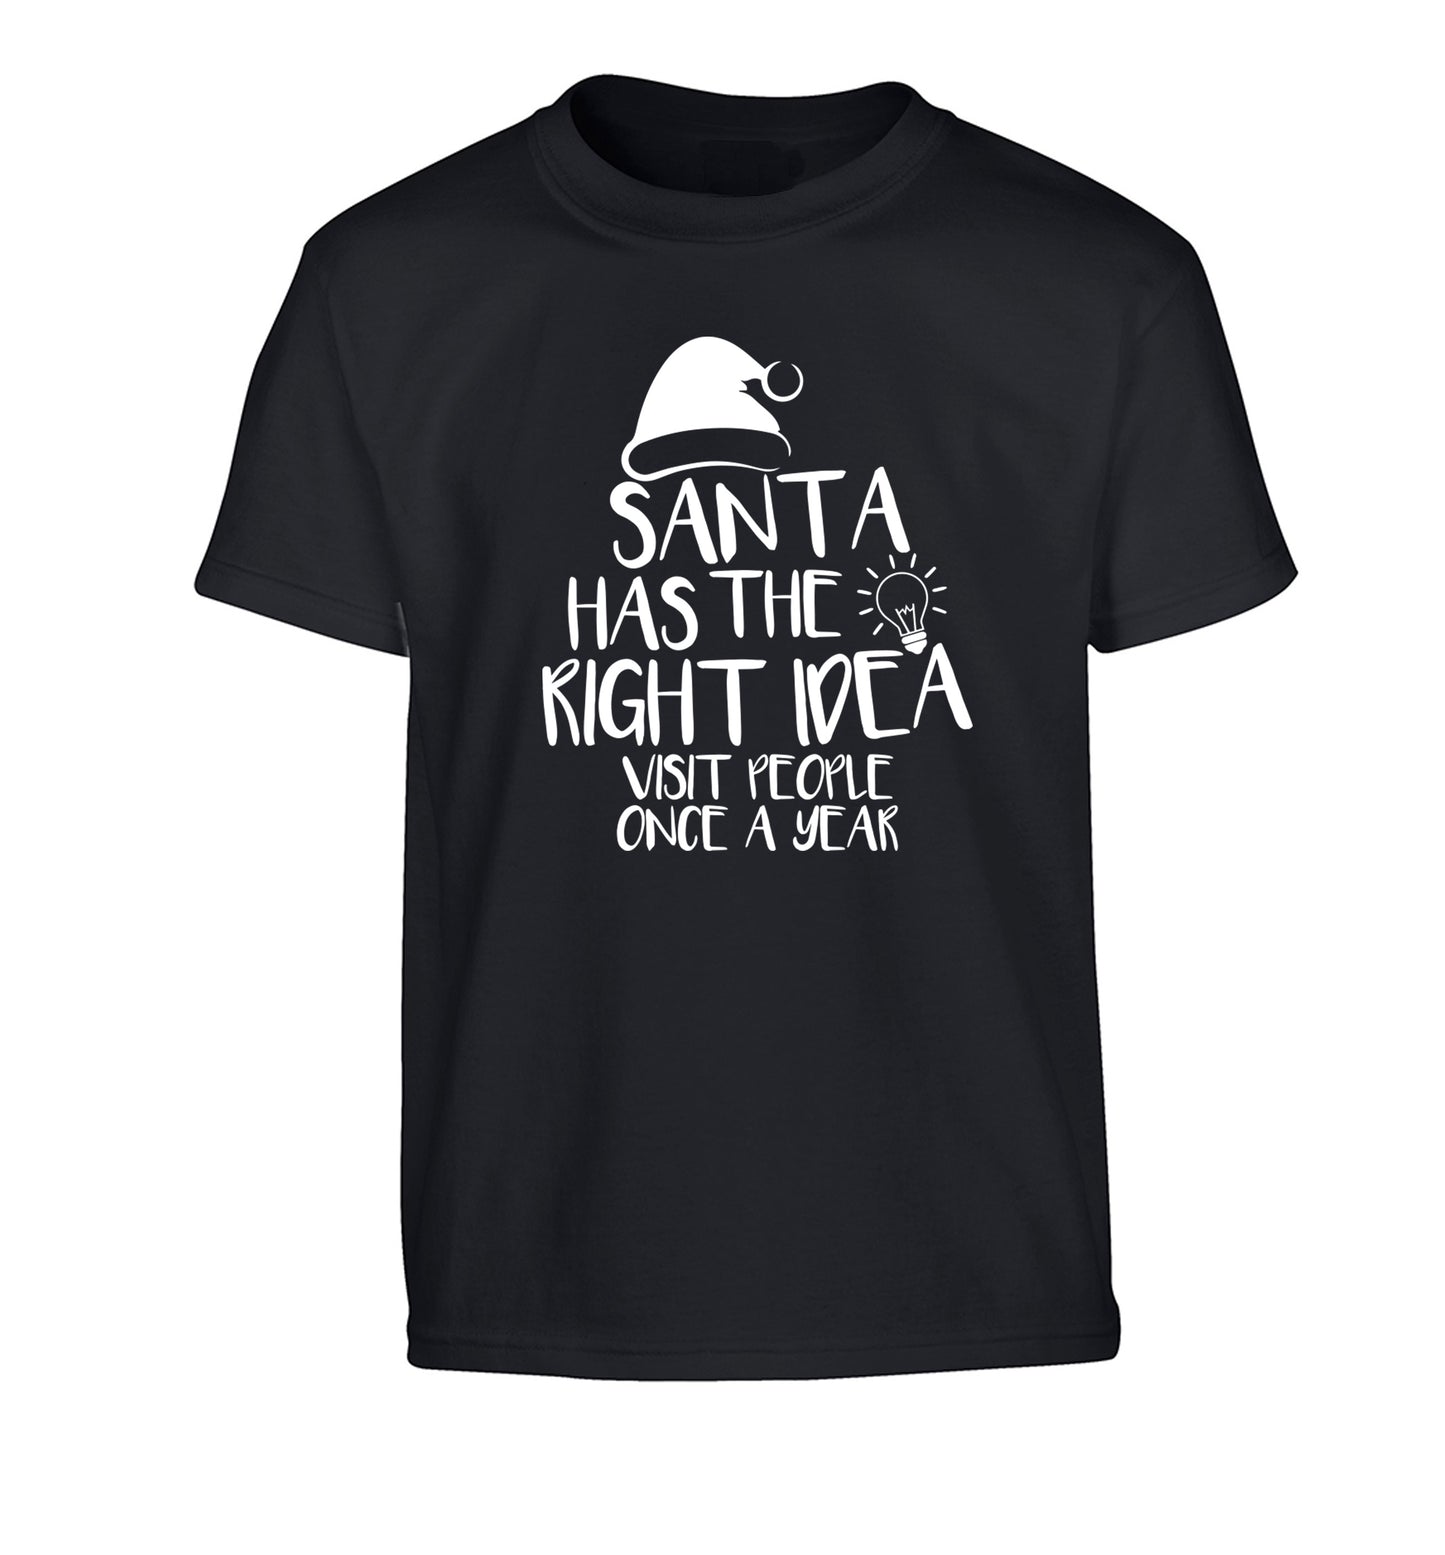 Santa has the right idea visit people once a year Children's black Tshirt 12-14 Years